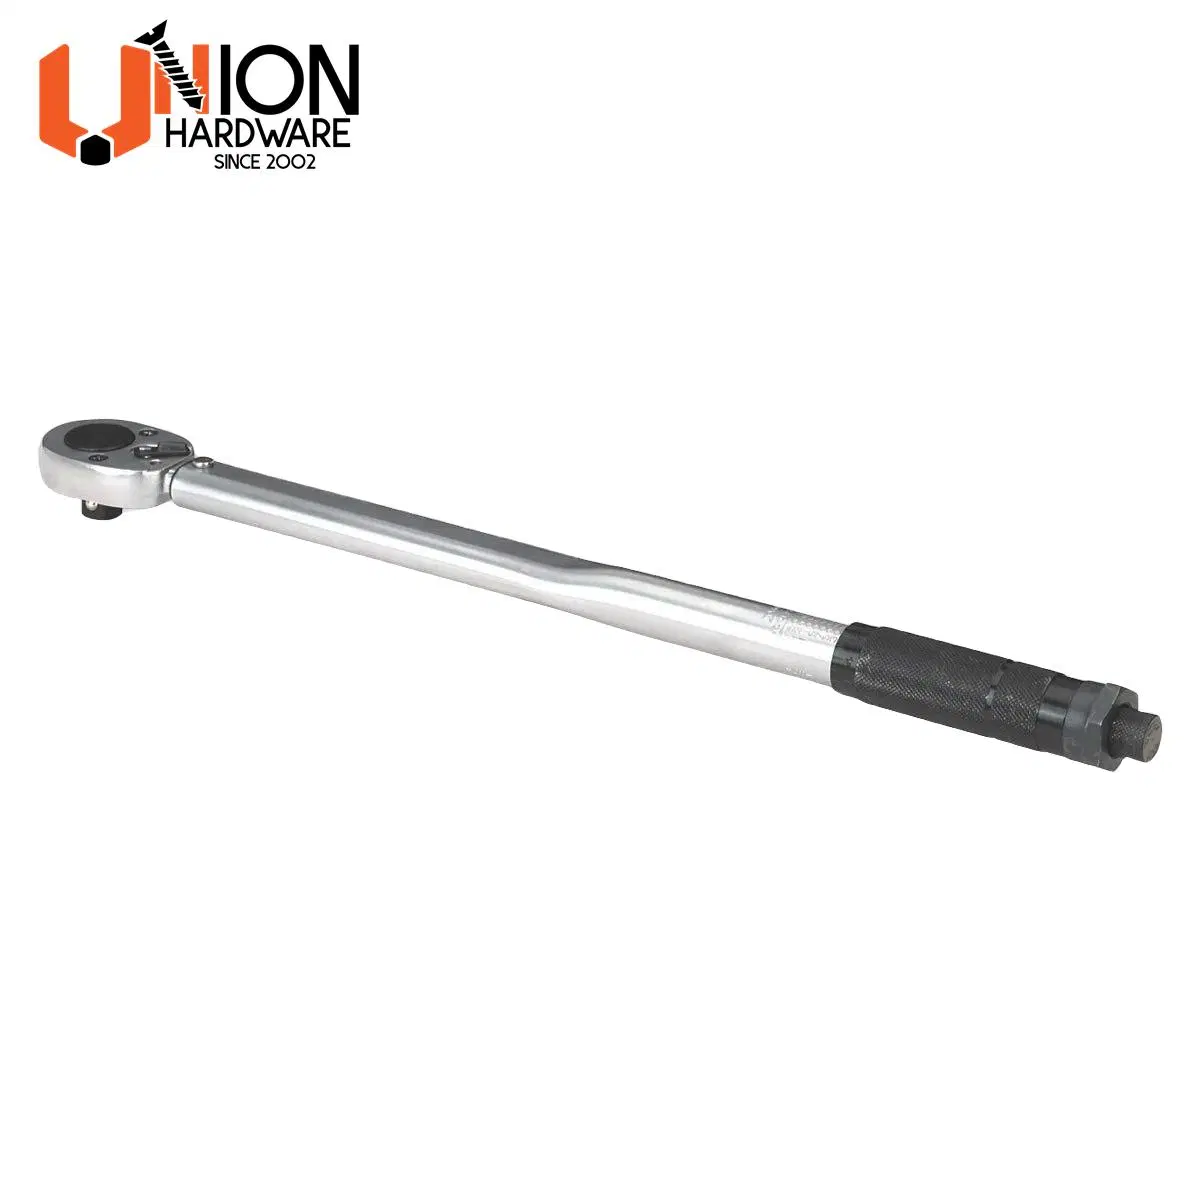 Adjustable N. M Readable Torque Wrench Tool